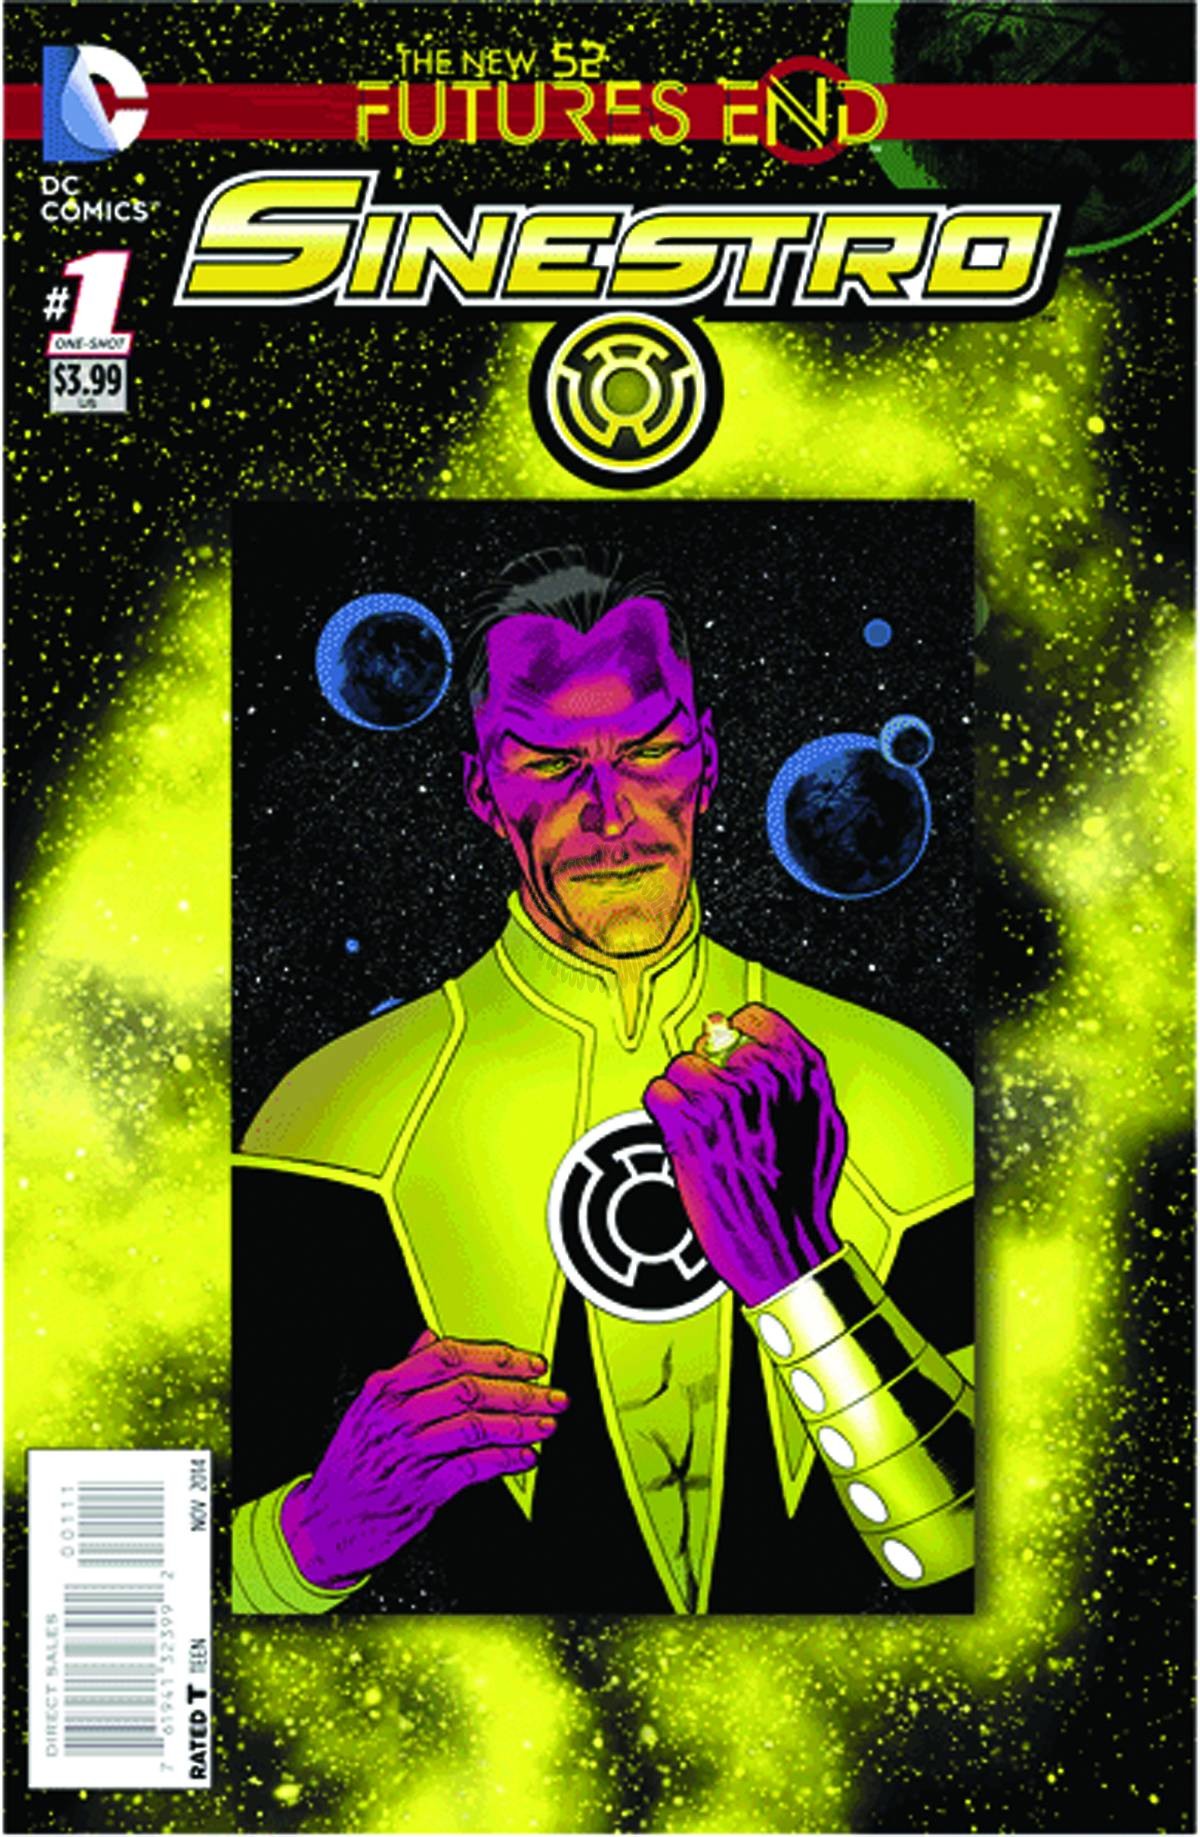 SINESTRO FUTURES END #1 3-D Motion Cover